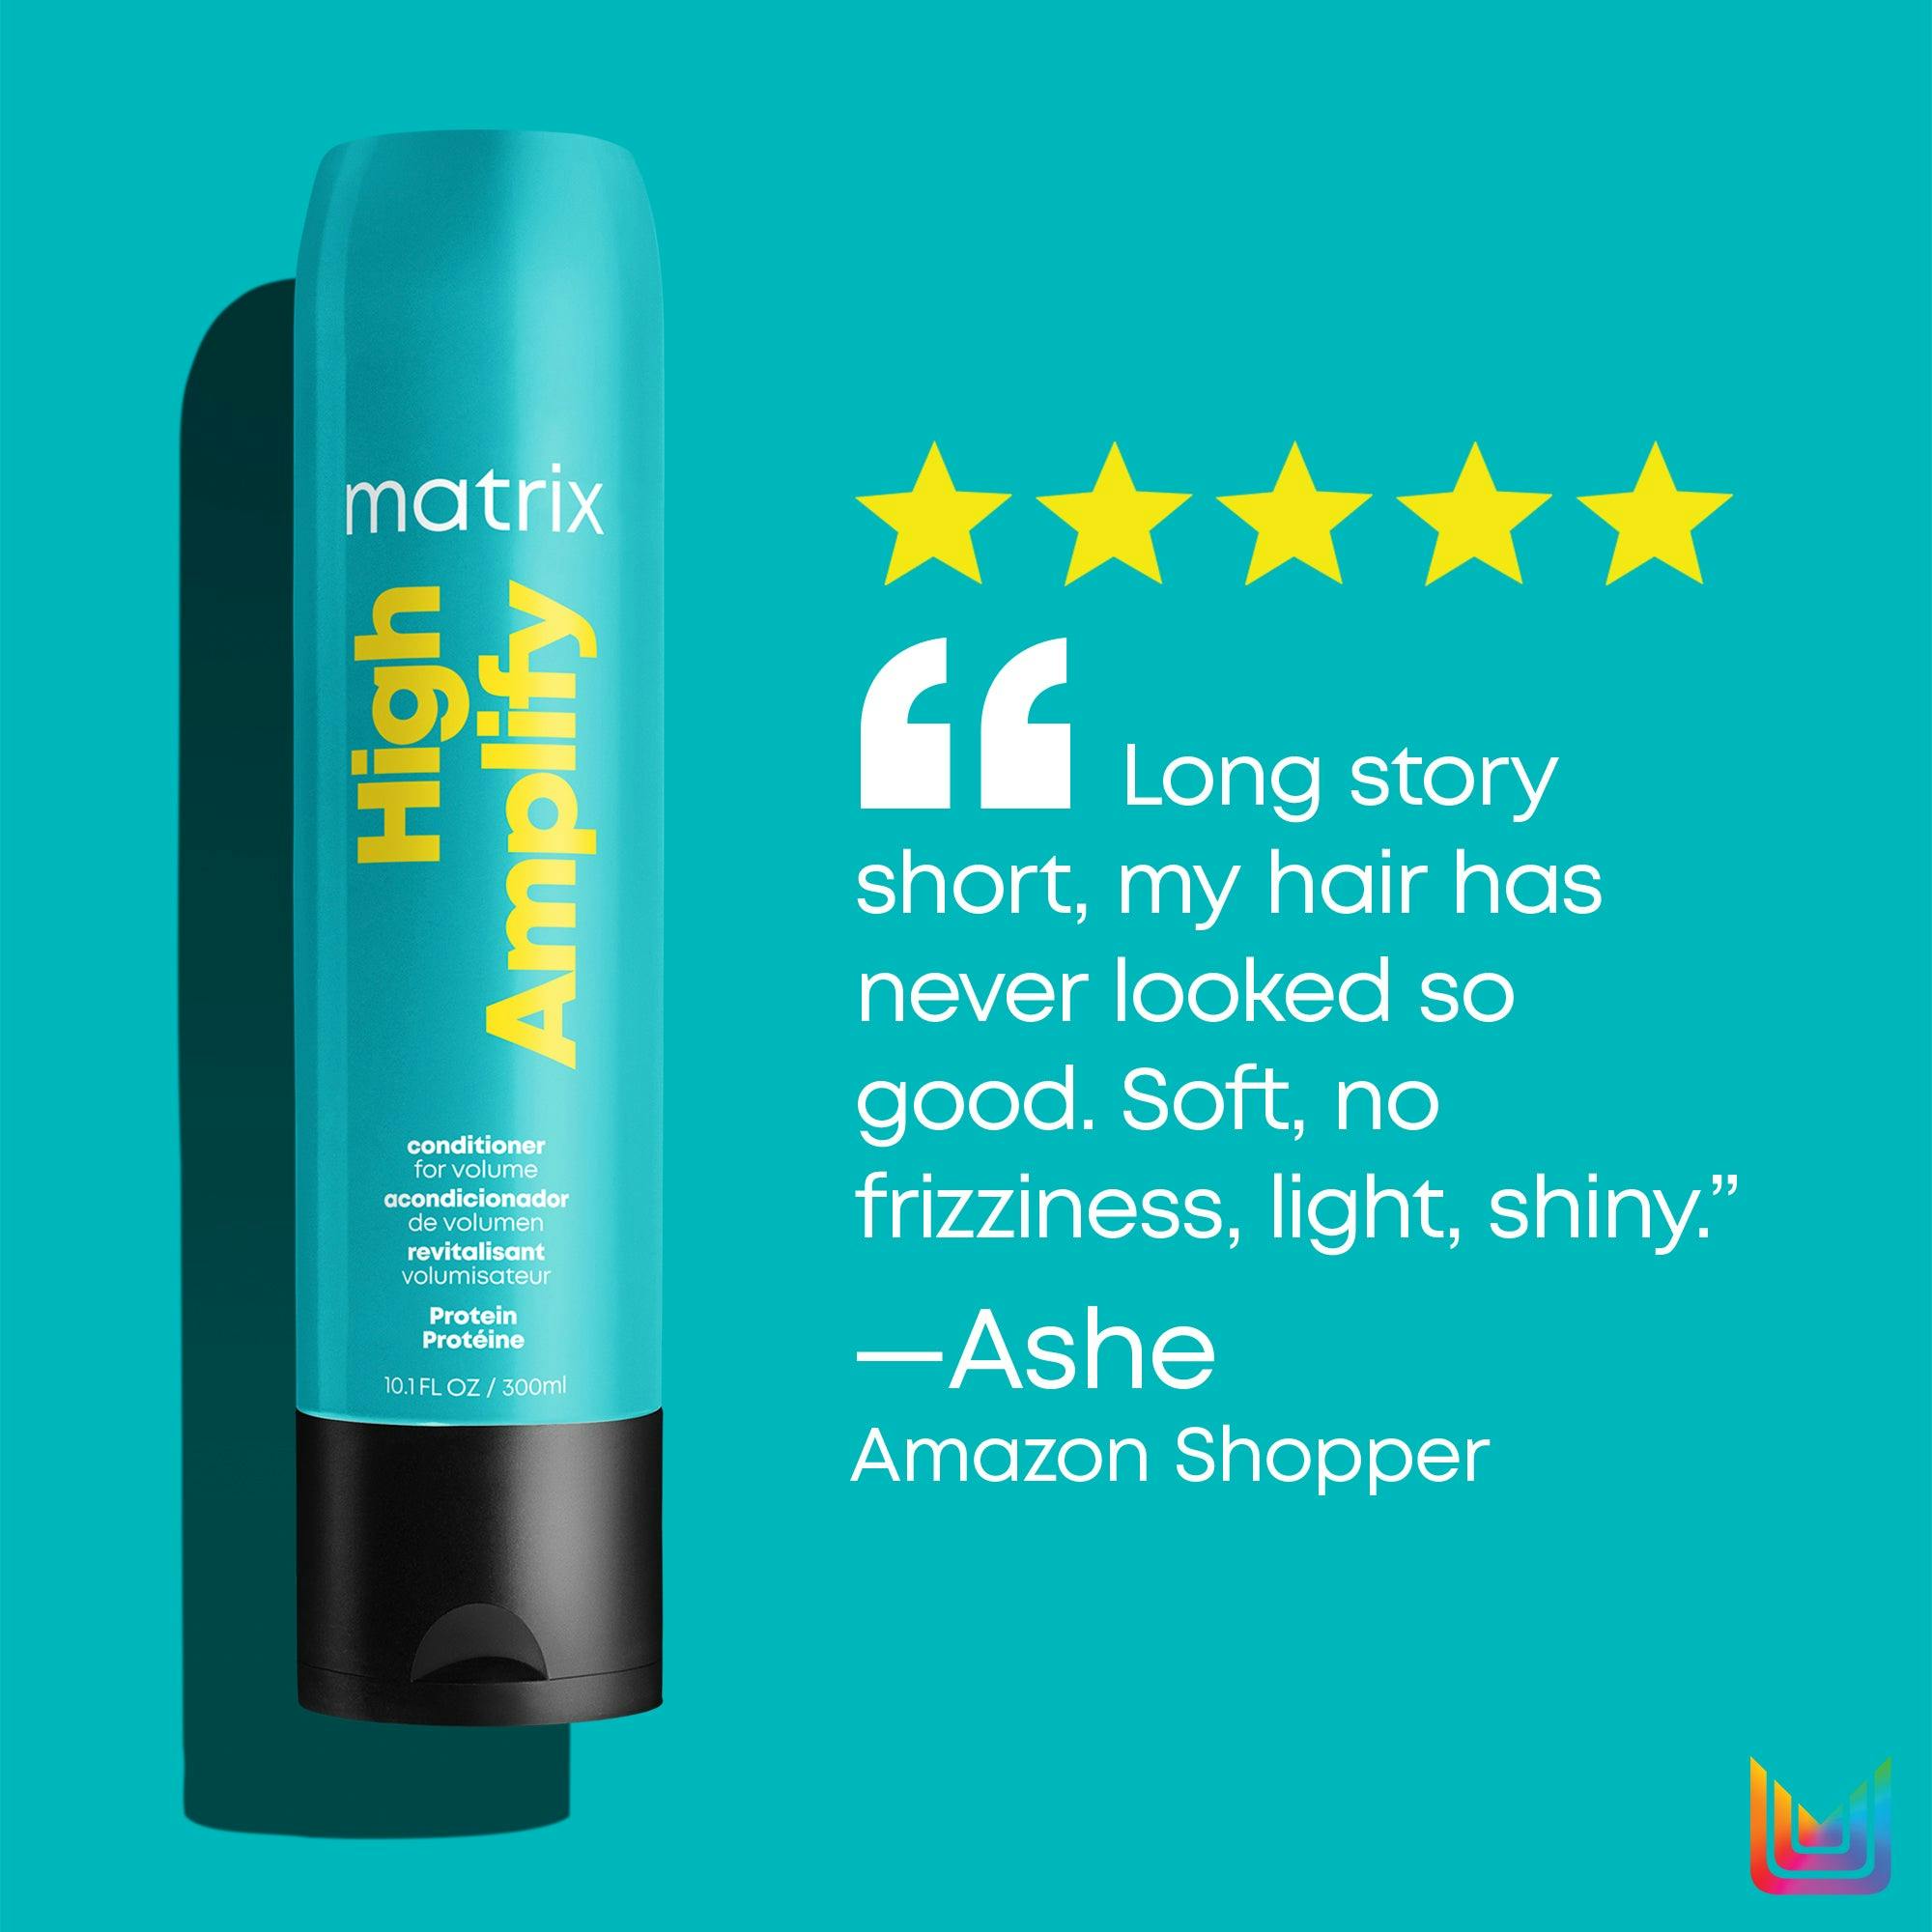 Matrix Total Results High Amplify Conditioner 1000ml